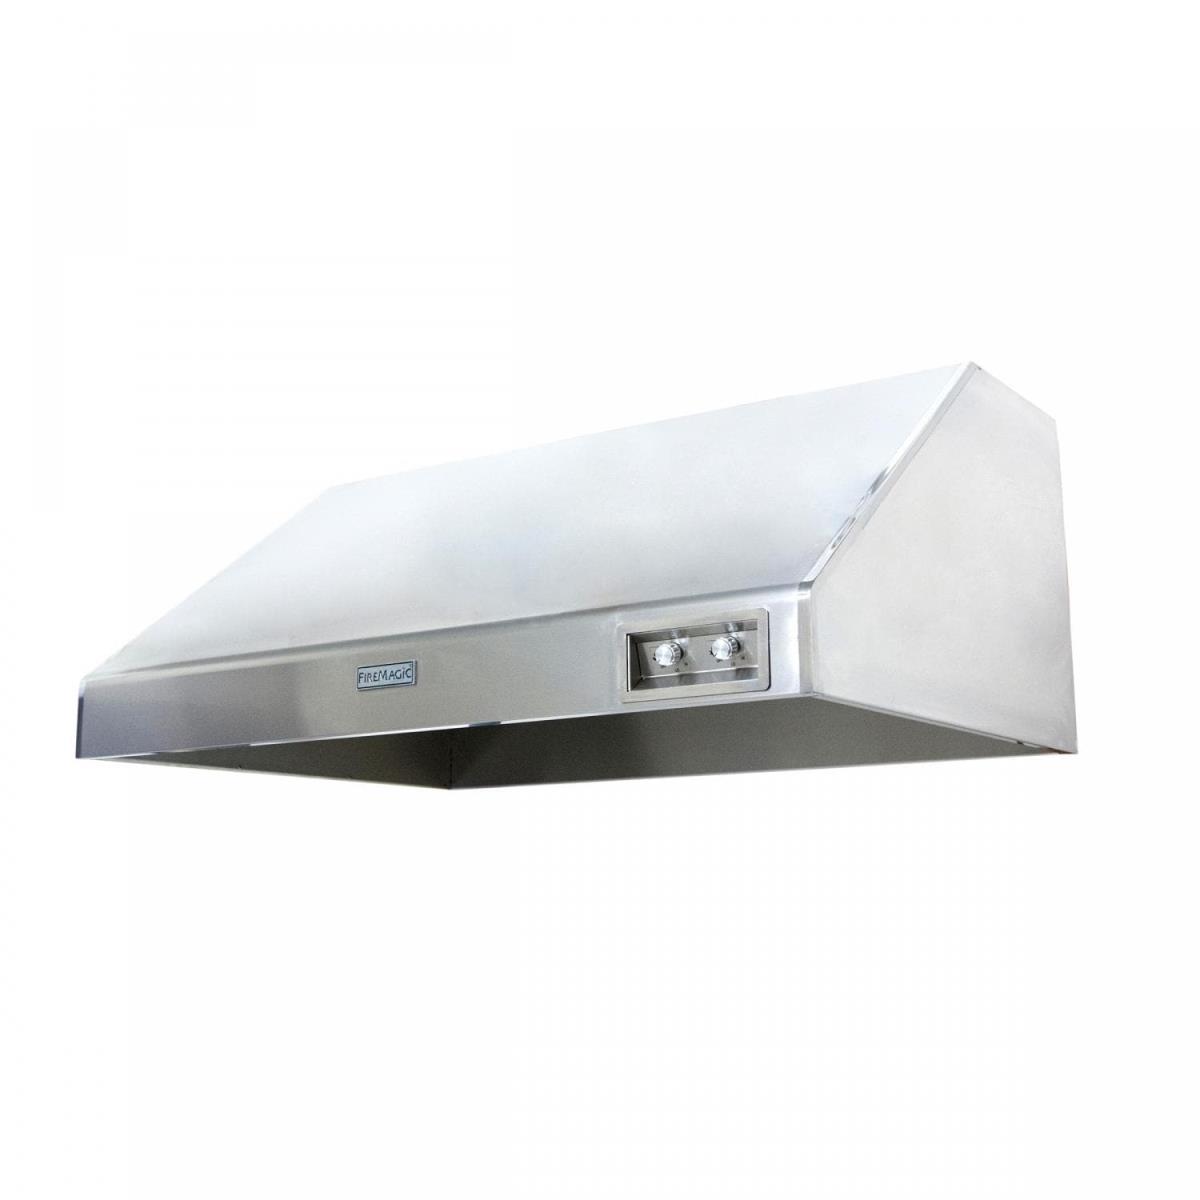 Fire Magic 42-VH-7 42 in. Stainless Steel Outdoor Vent Hood with Fan